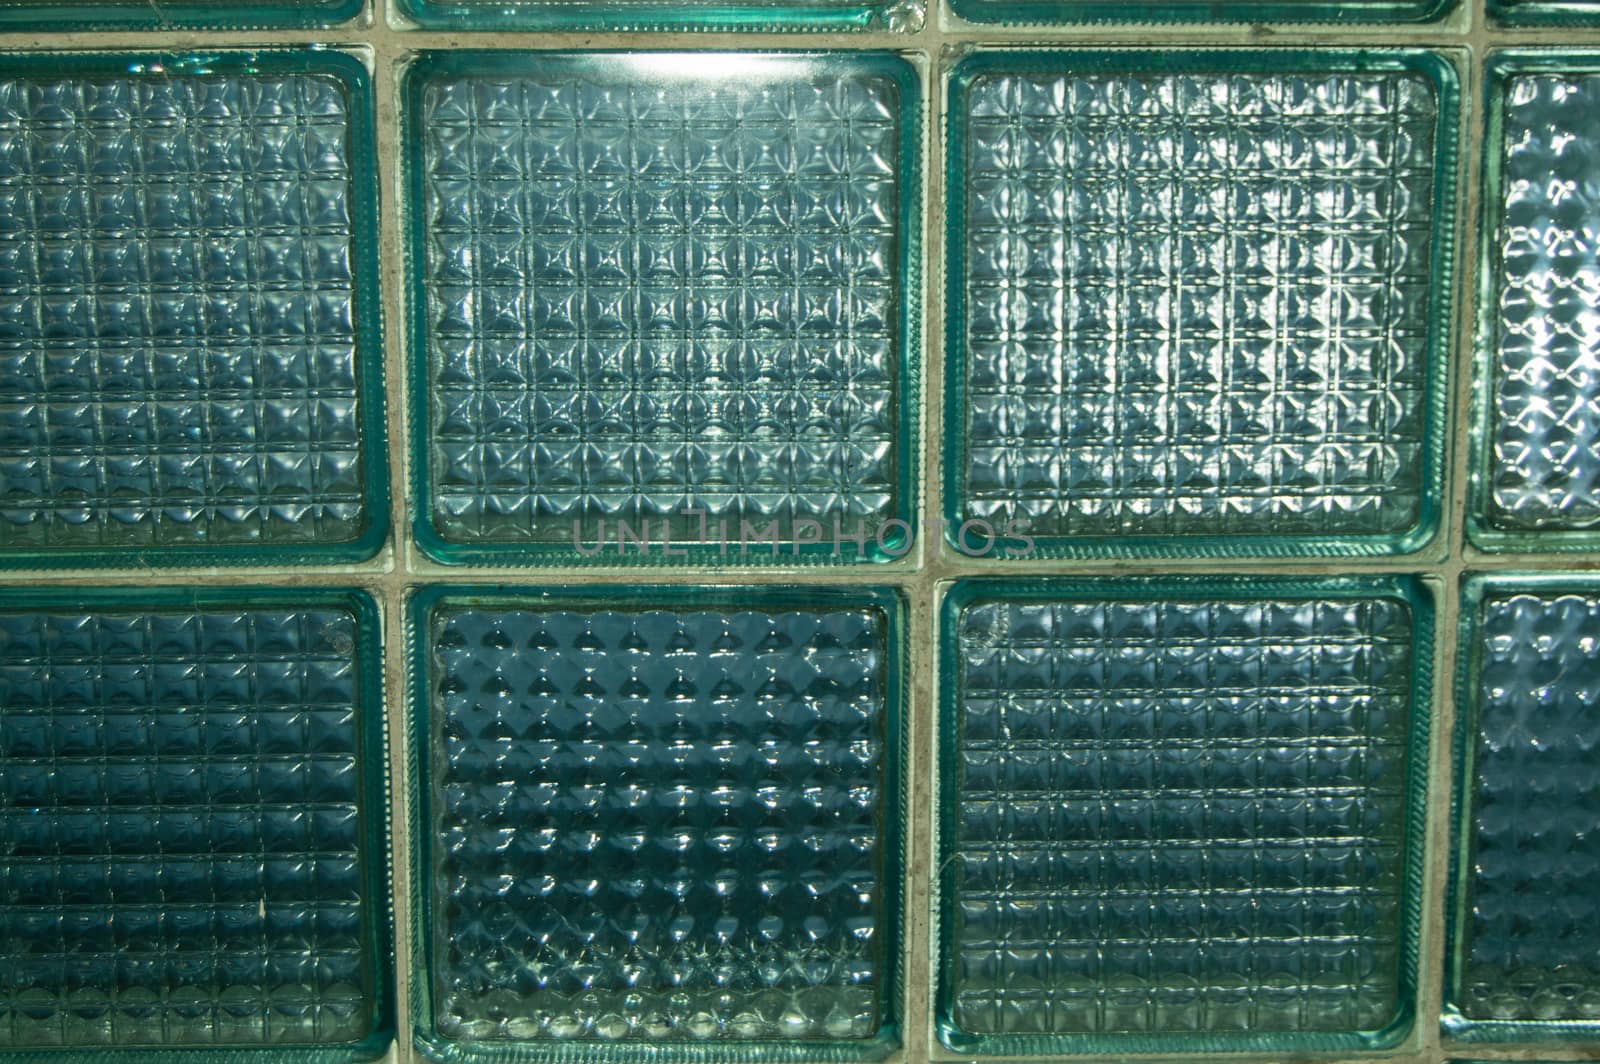 BACKGROUND TEXTURE OF GLASS TRANSPARENT SQUARE TILES.